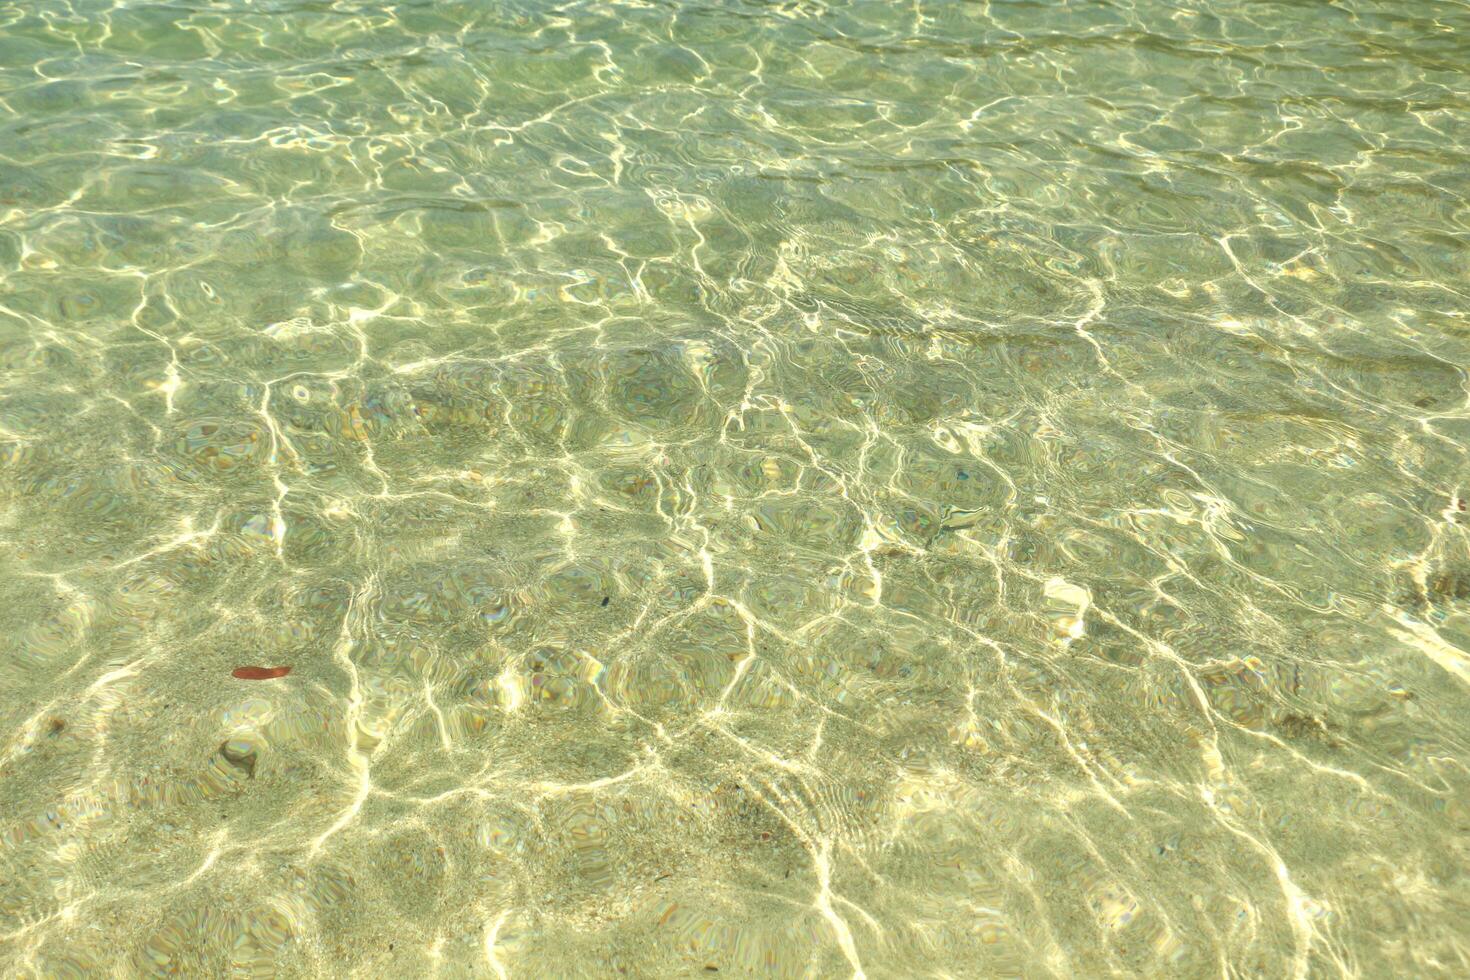 The surface of the water has waves and sparkles from the sunlight that shines into the sea. photo